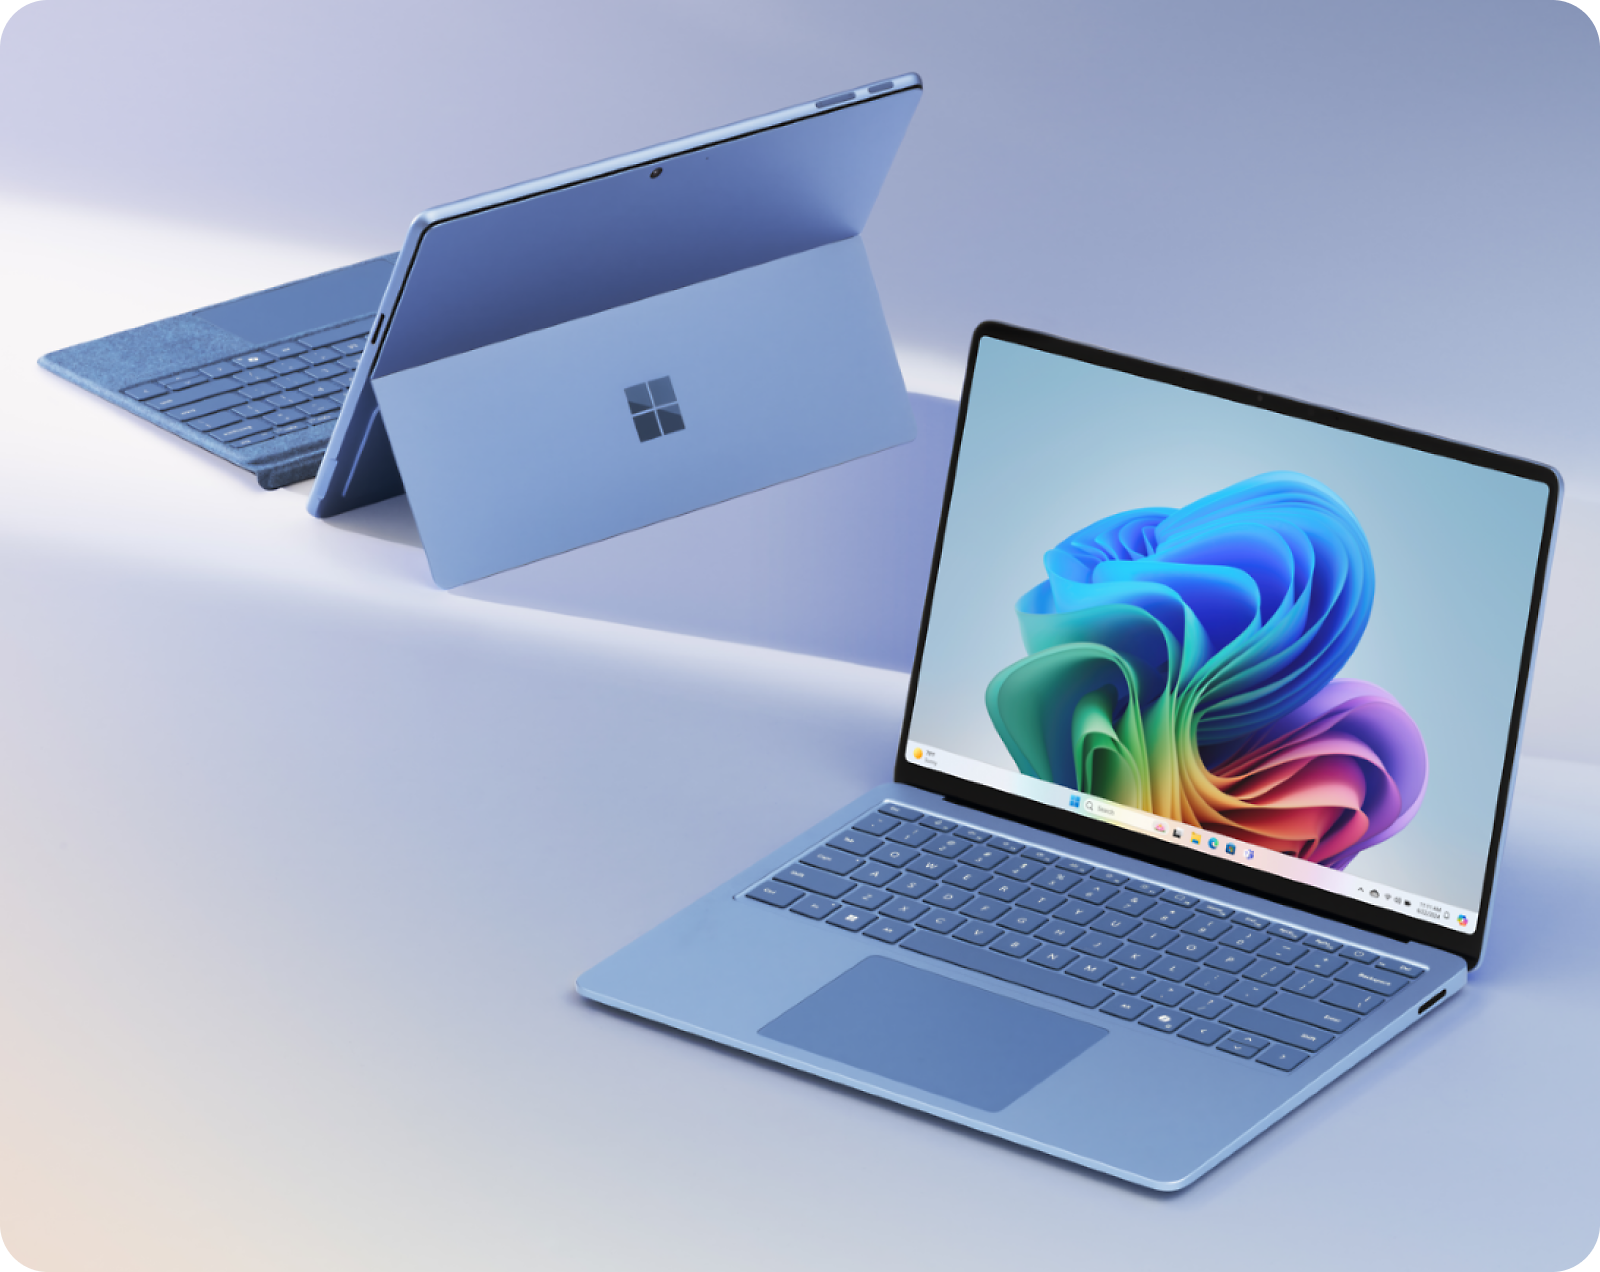 Two Microsoft Surface devices: one in laptop mode displaying Windows wallpaper and one in tablet mode with a kickstand